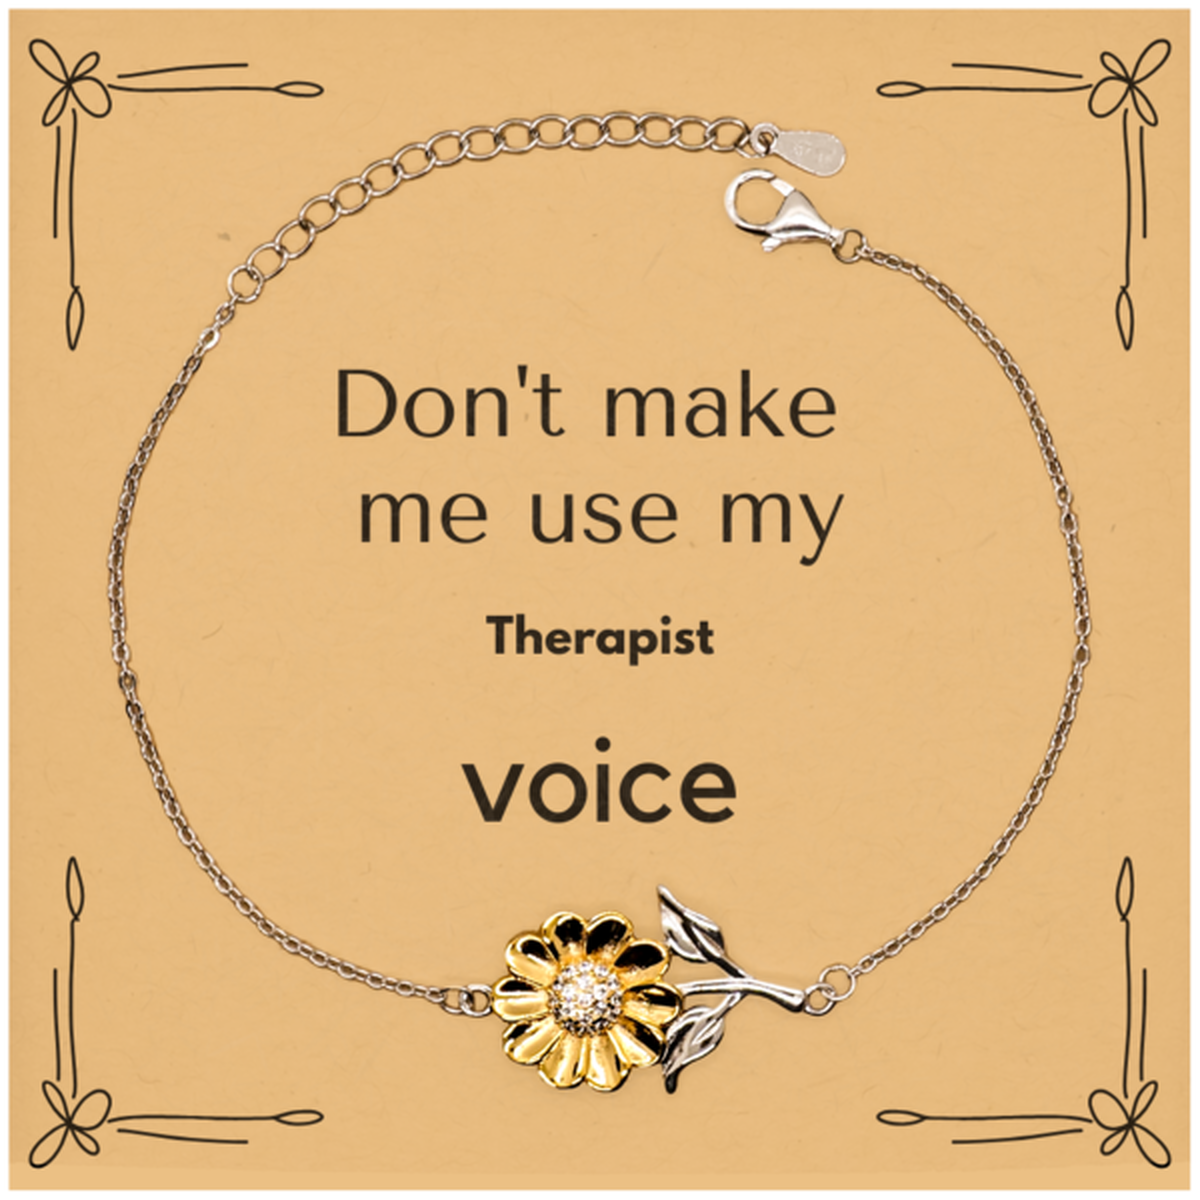 Don't make me use my Therapist voice, Sarcasm Therapist Card Gifts, Christmas Therapist Sunflower Bracelet Birthday Unique Gifts For Therapist Coworkers, Men, Women, Colleague, Friends